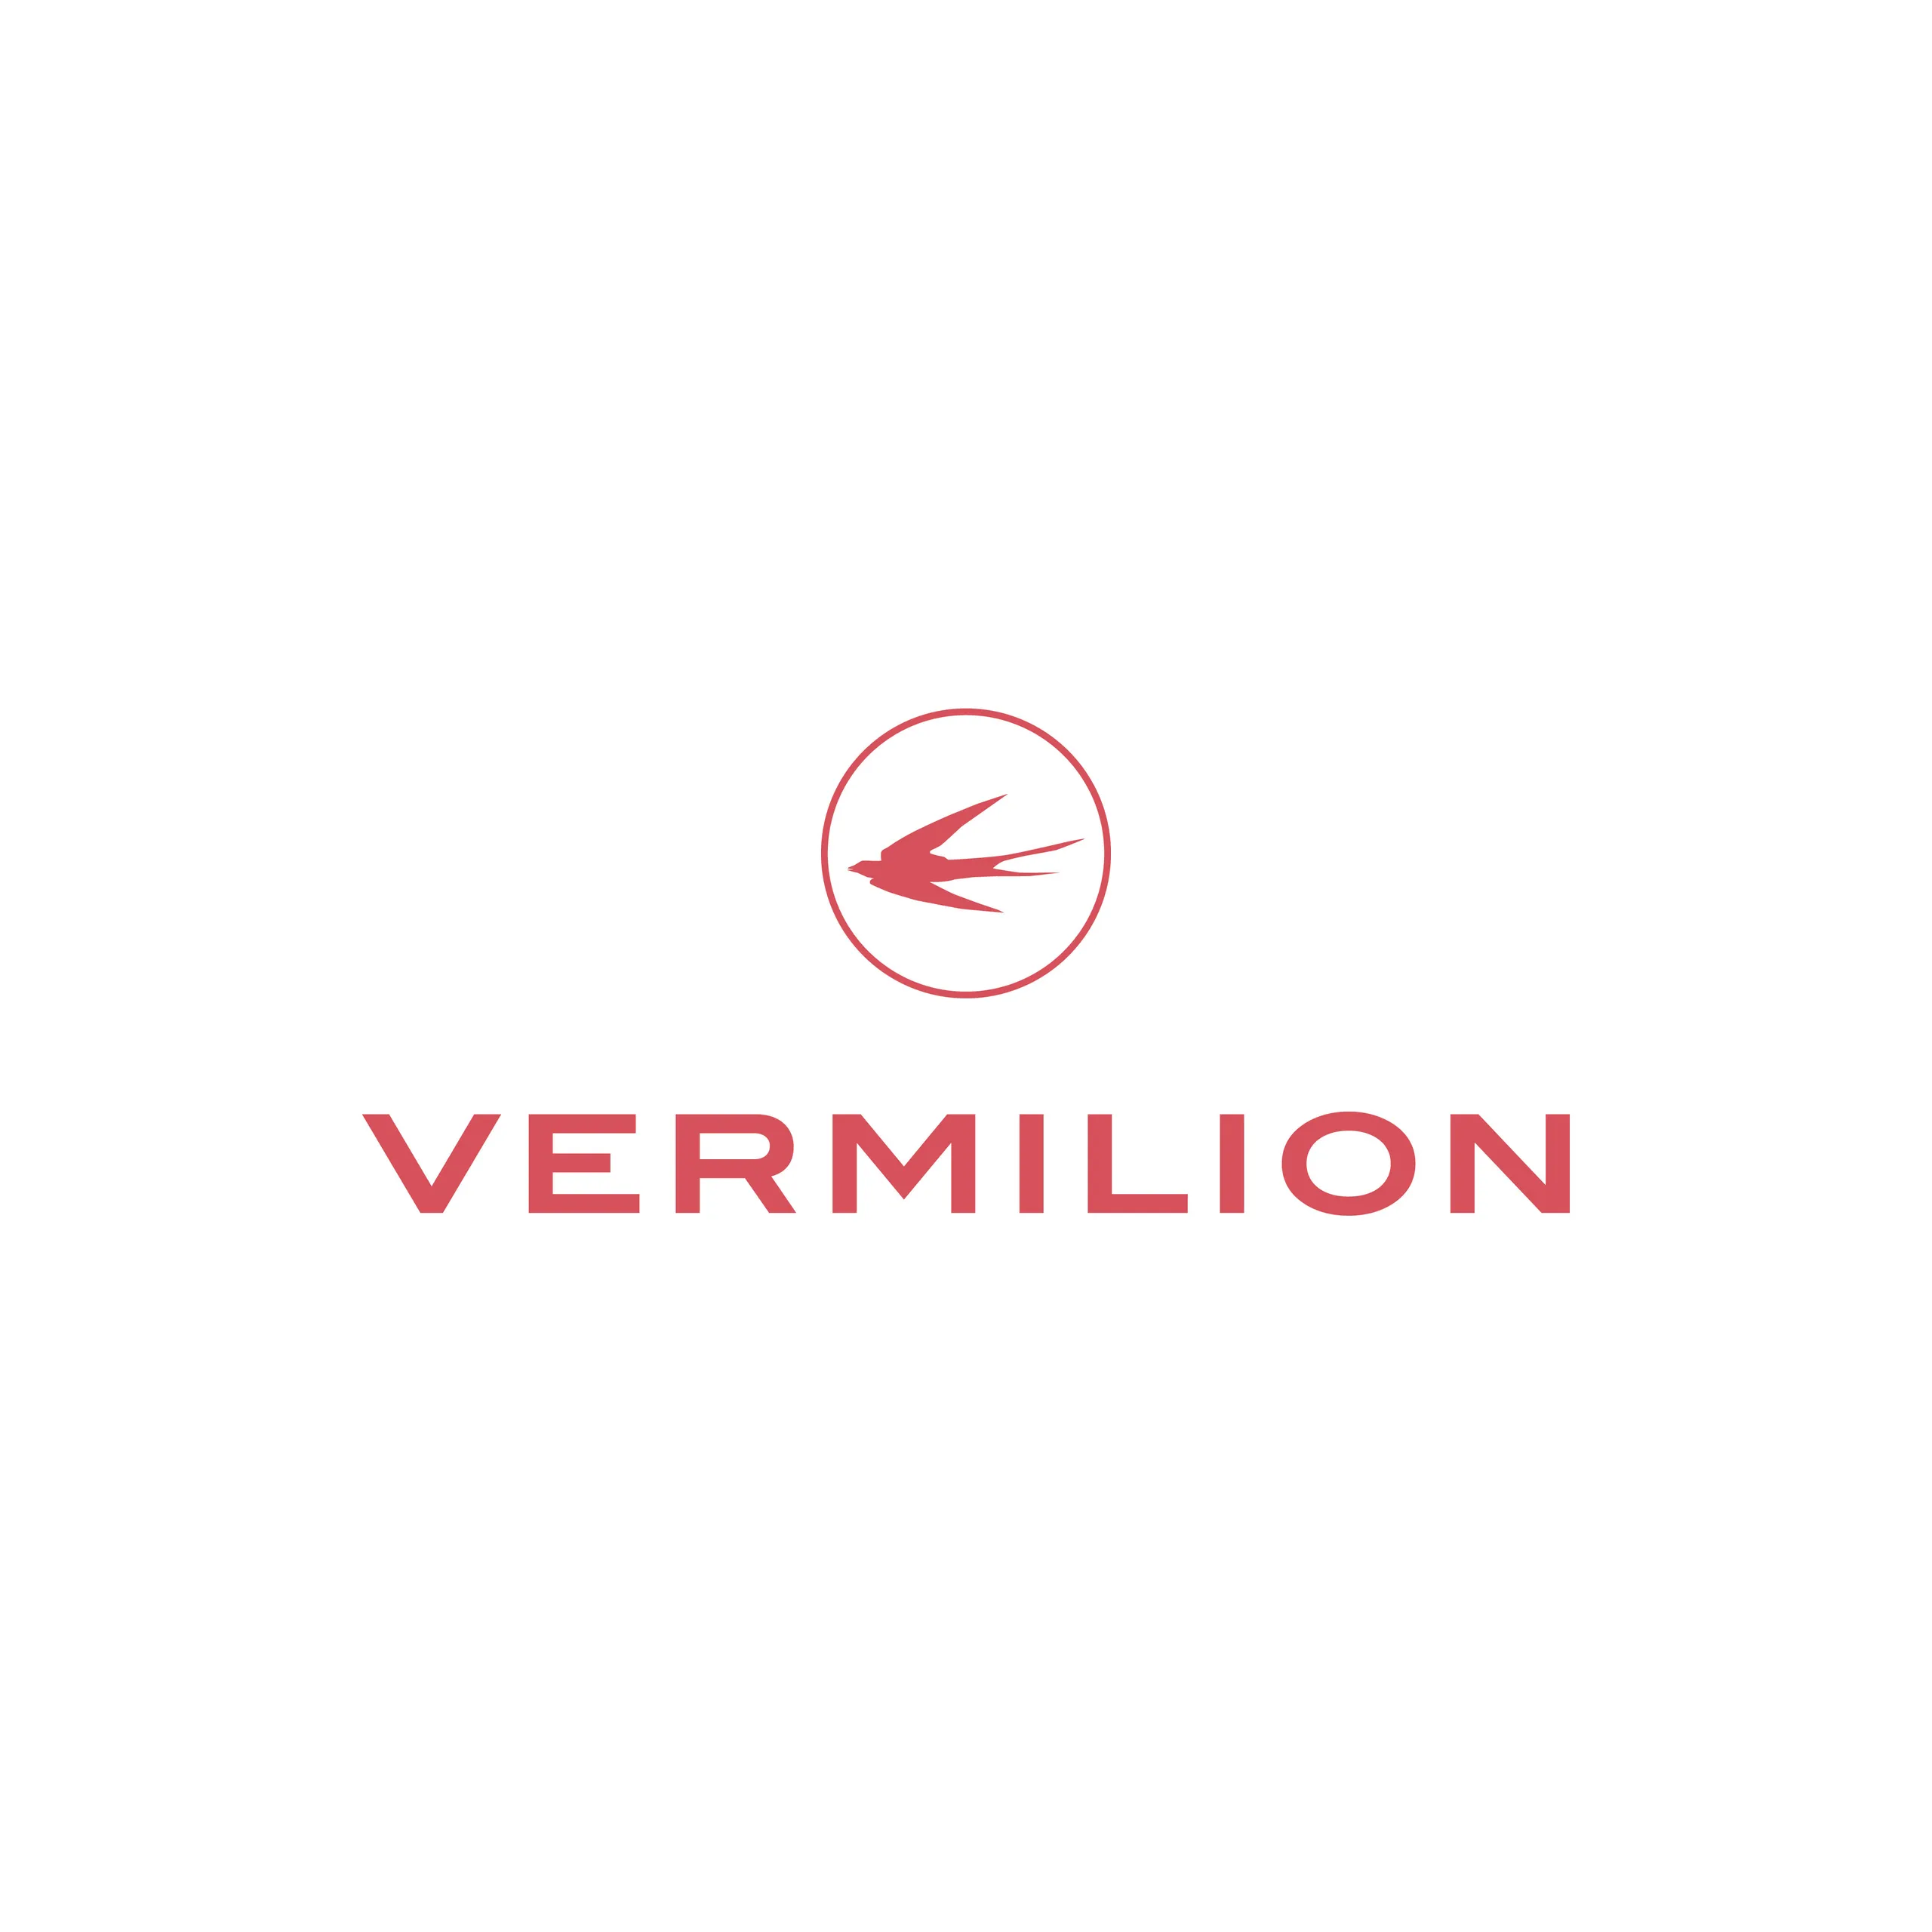 Vermilion vertical logo lockup in red on a white field